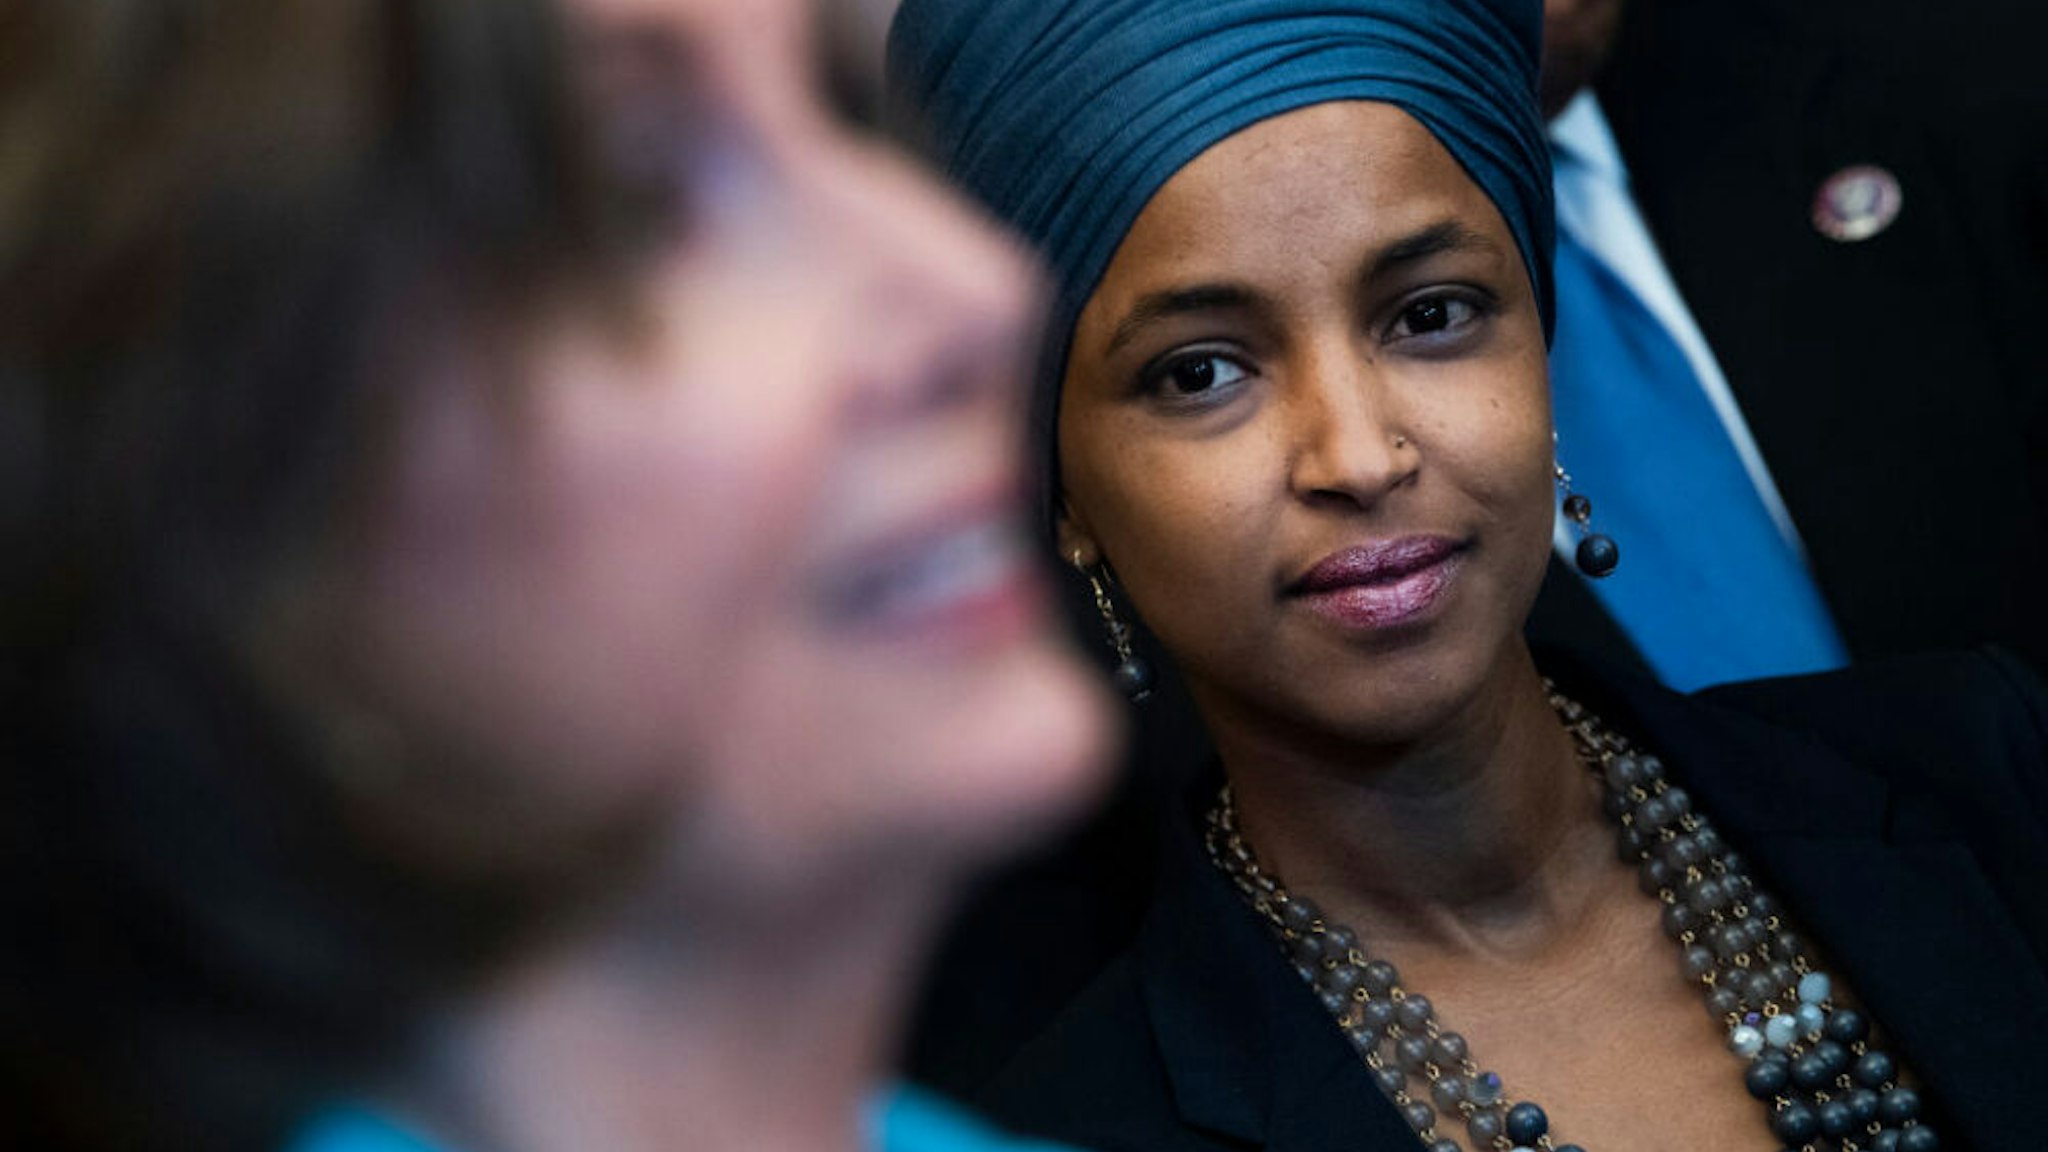 UNITED STATES - JUNE 17 (FILE): Rep. Ilhan Omar, D-Minn., right, and Speaker of the House Nancy Pelosi, D-Calif., attend a bill enrollment ceremony for the Juneteenth National Independence Day Act in the Capitol on Thursday, June 17, 2021.